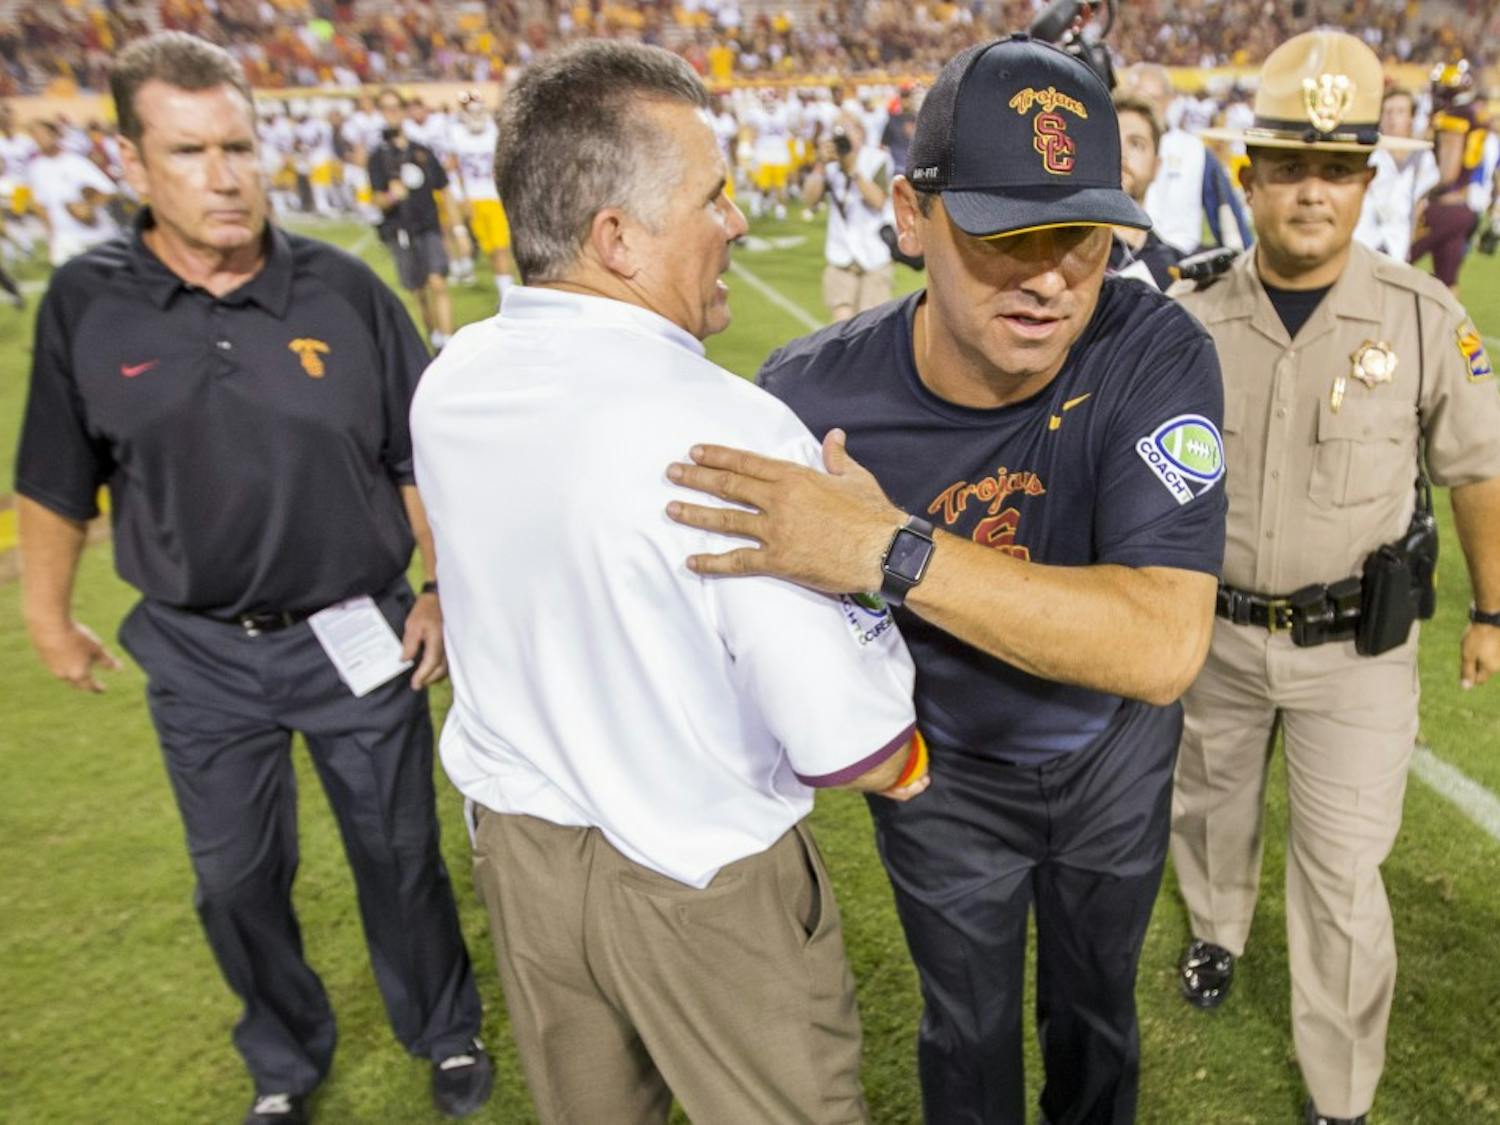 ASU head coach Todd Graham, left, and USC coach Steve Sarkisian shake hands after a contest on Saturday, Sept. 26, 2015, at Sun Devil Stadium in Tempe. The ASU football squad lost to the visiting USC Trojans 42-14.